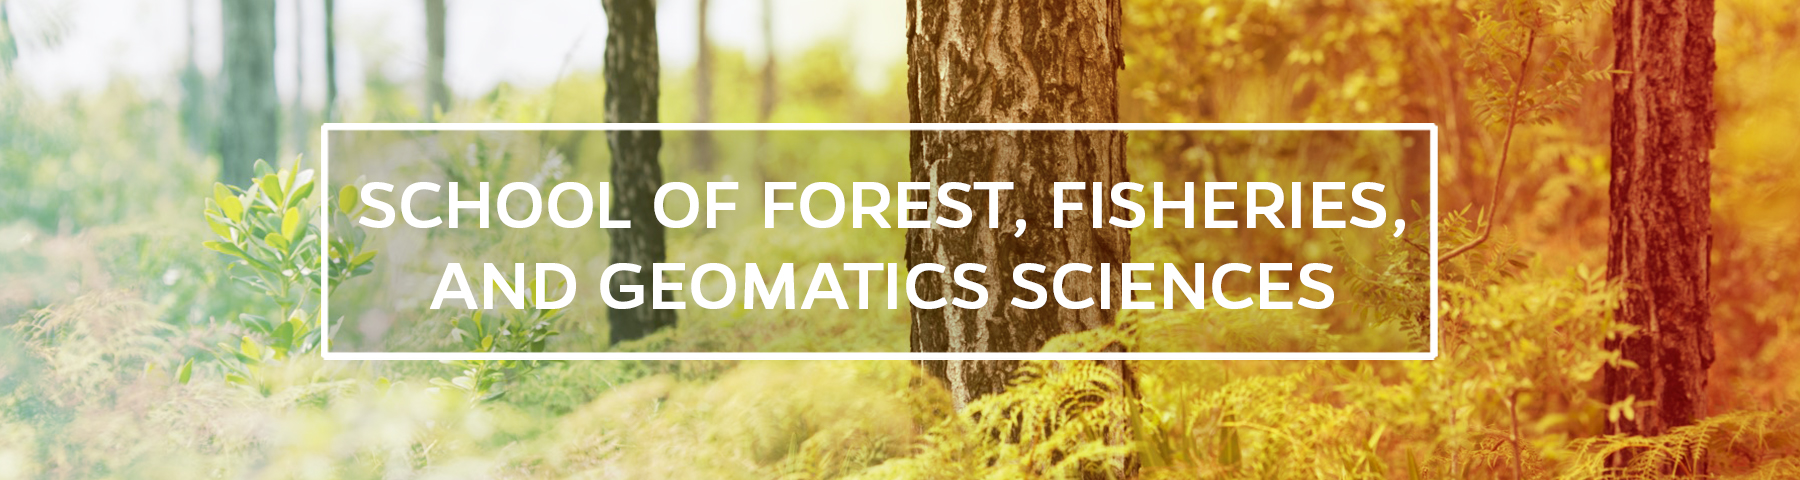 UF/IFAS School of Forest, Fisheries, and Geomatics Sciences